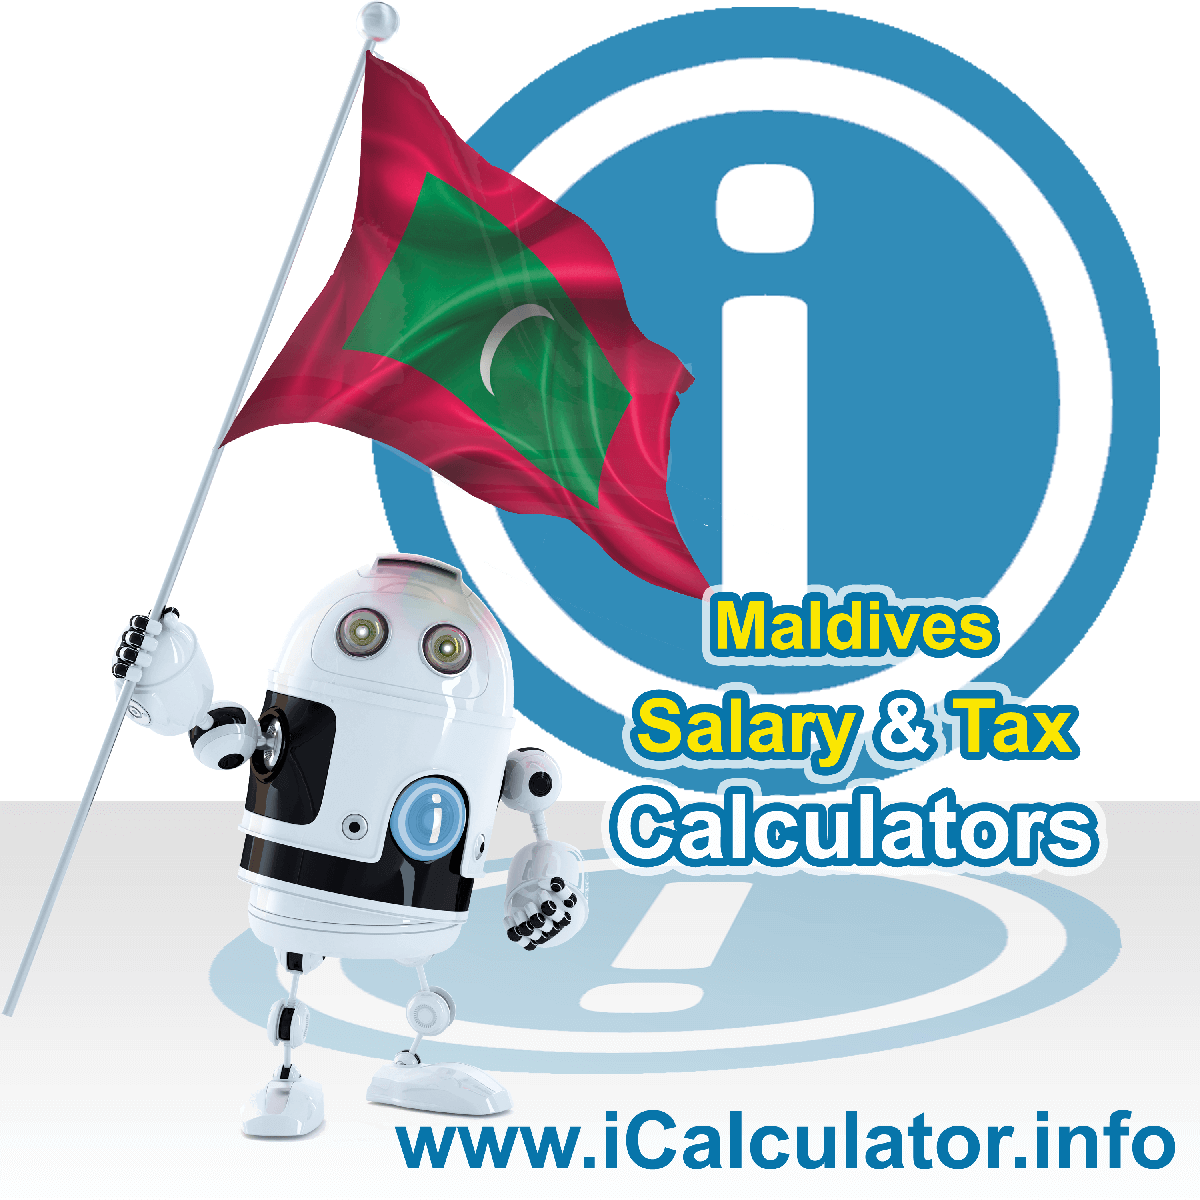 Maldives Tax Calculator. This image shows the Maldives flag and information relating to the tax formula for the Maldives Salary Calculator